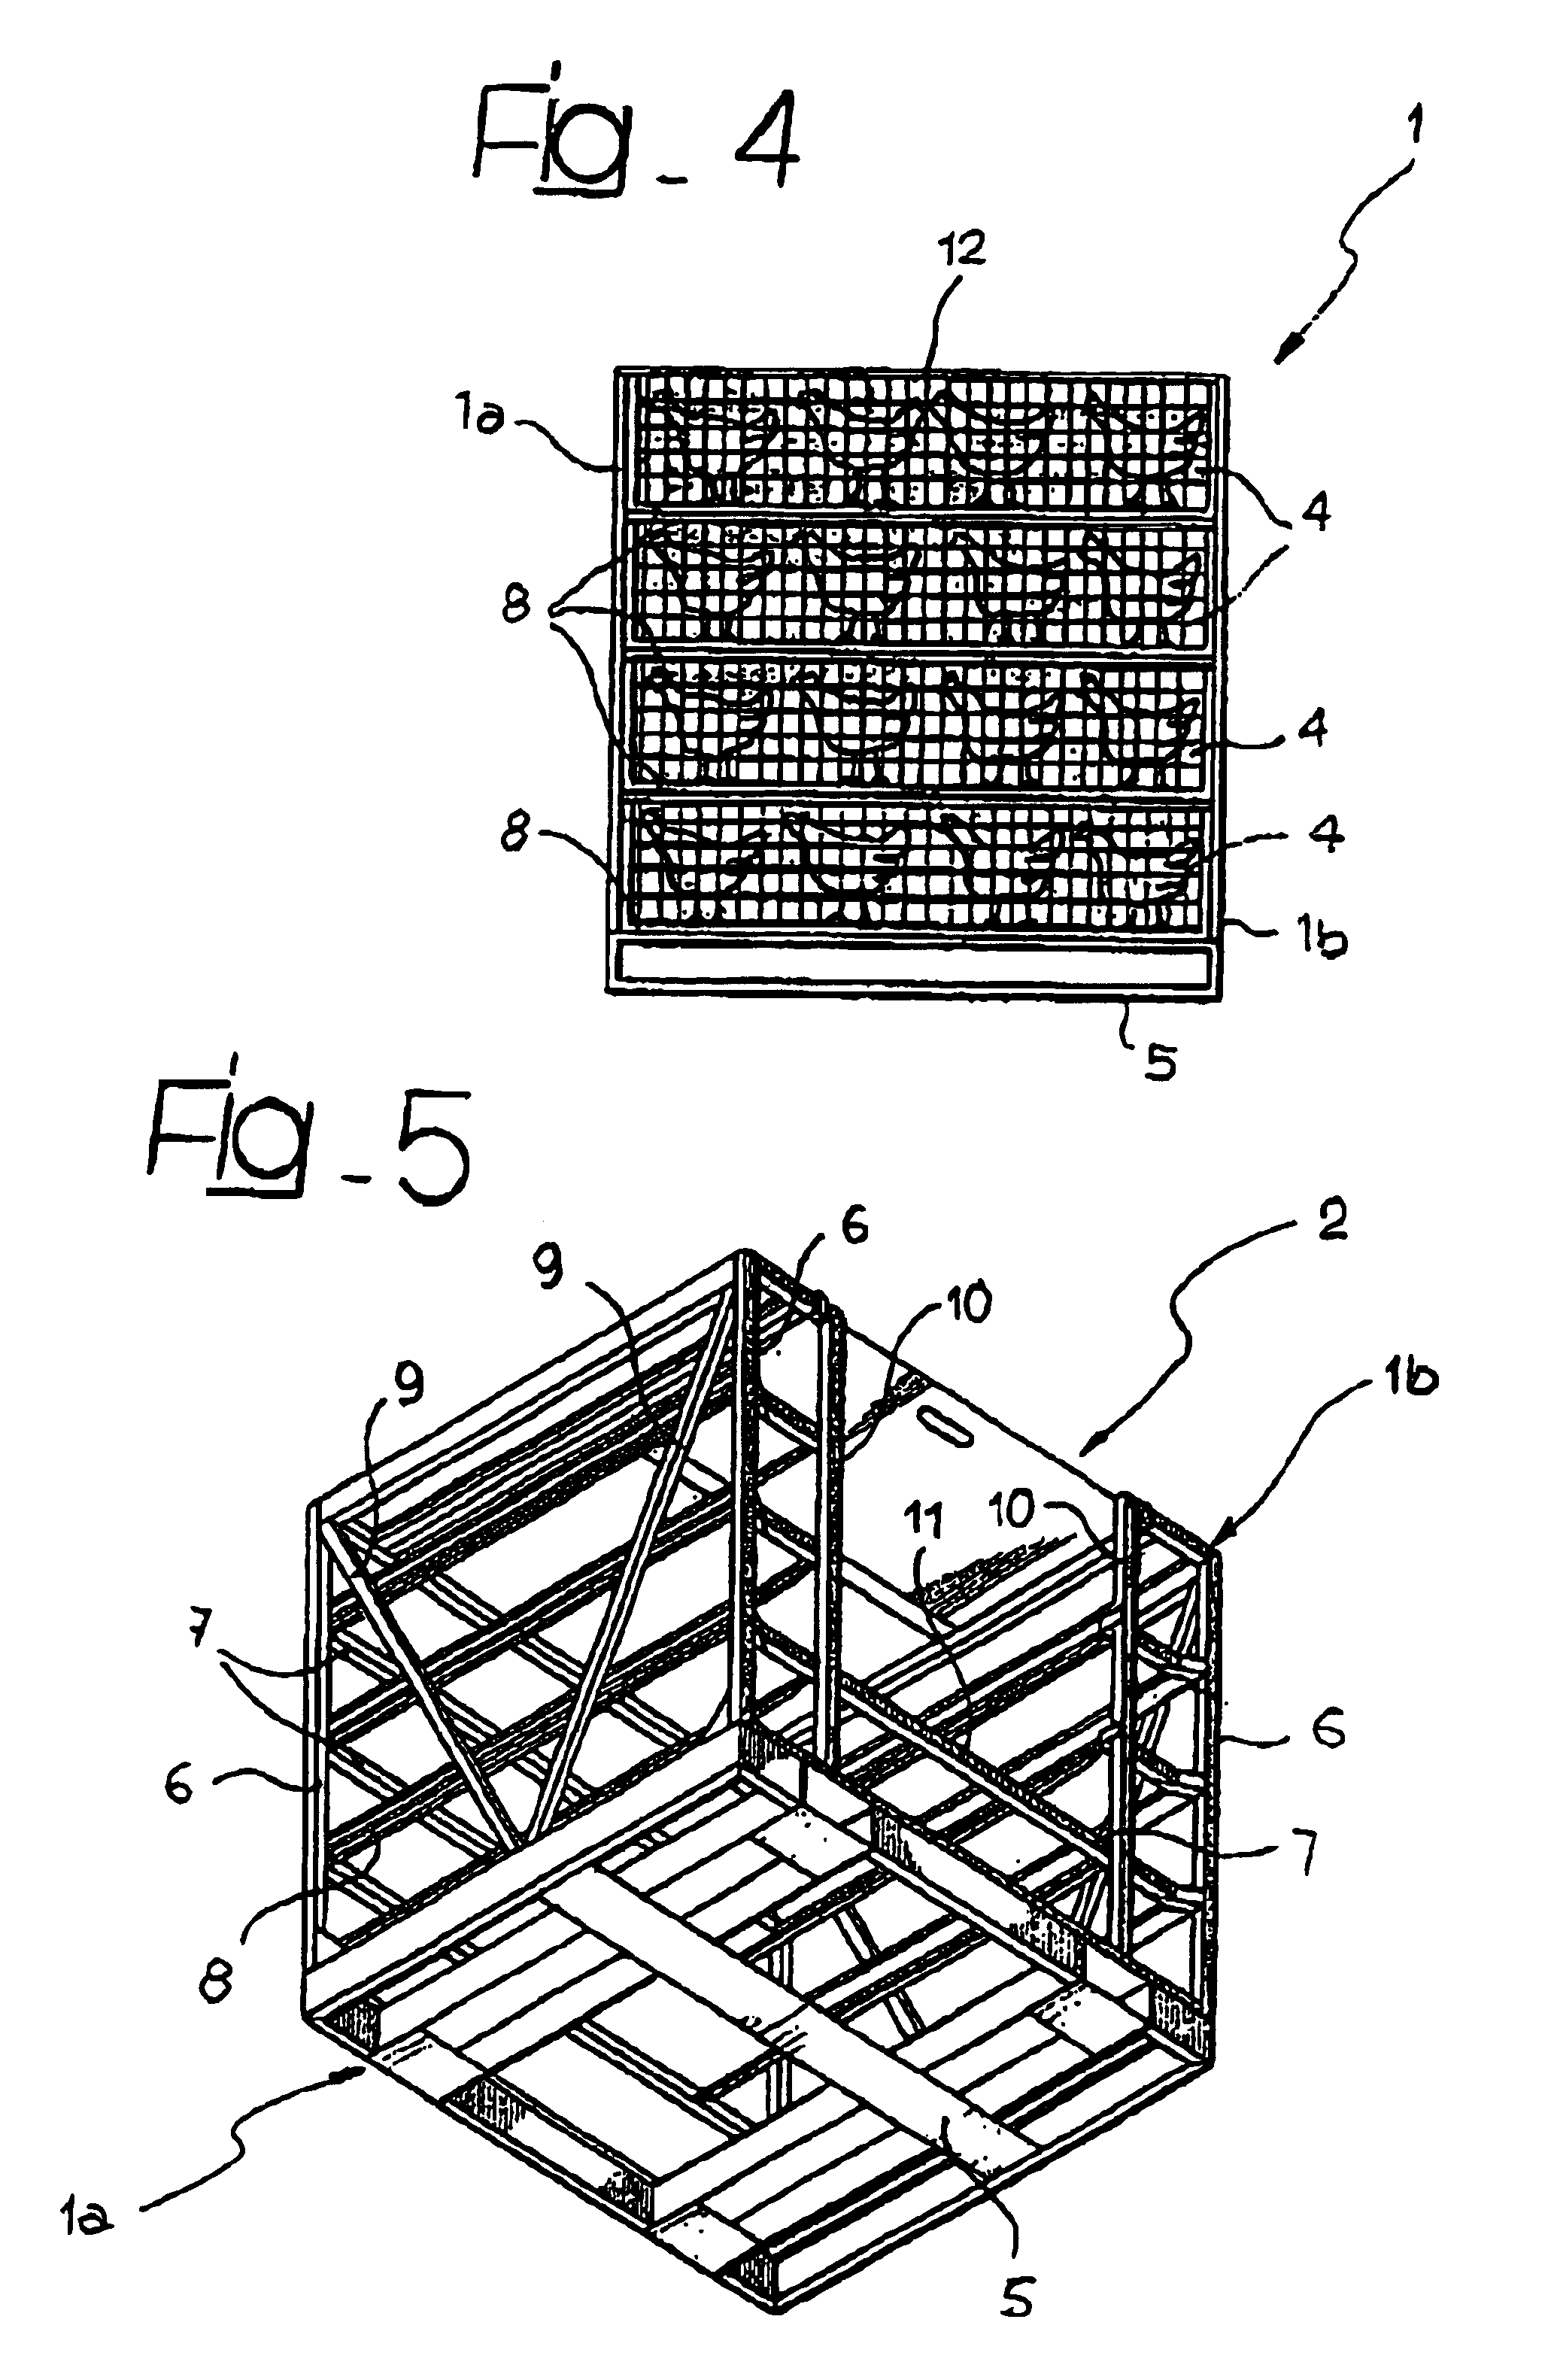 Method and system for transporting live poultry